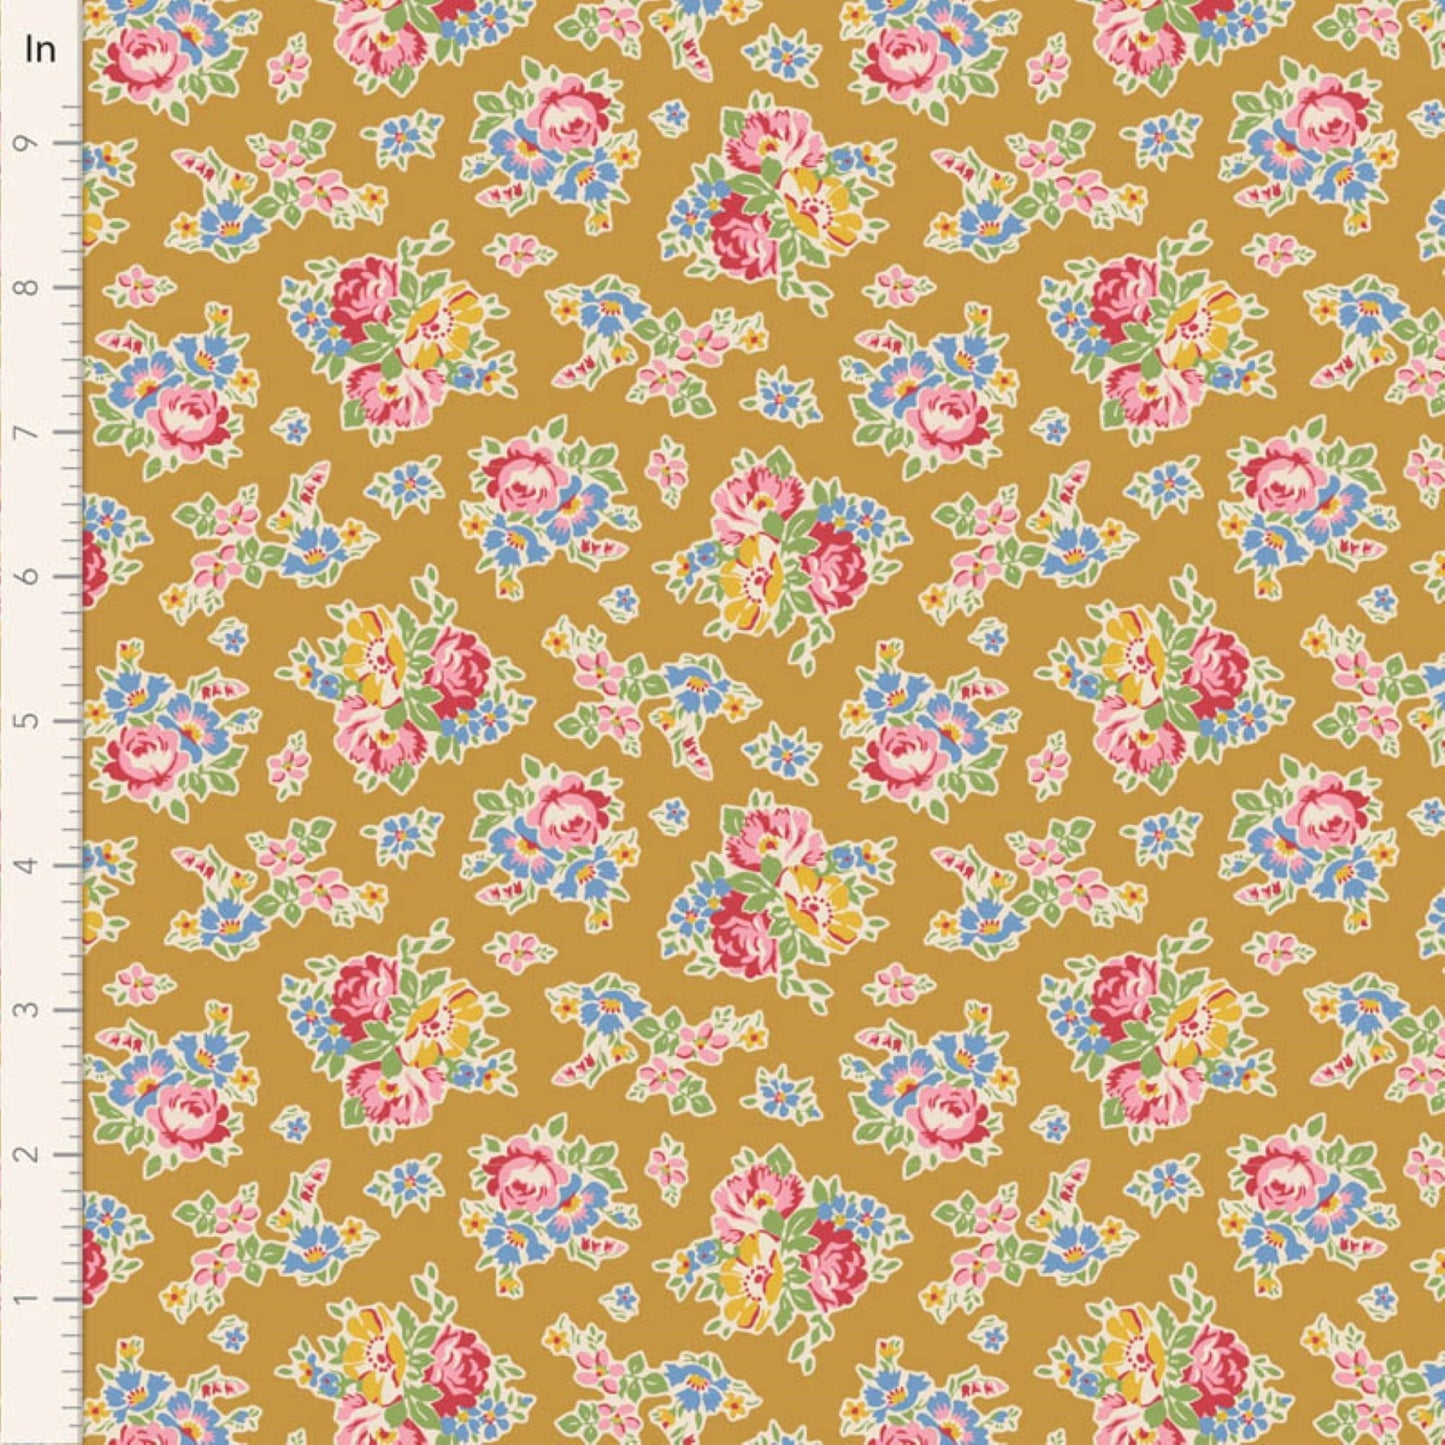 Tilda Jubilee and Farm Flowers floral mustard yellow and pink bundle 7 Fat 16's cotton quilt fabric